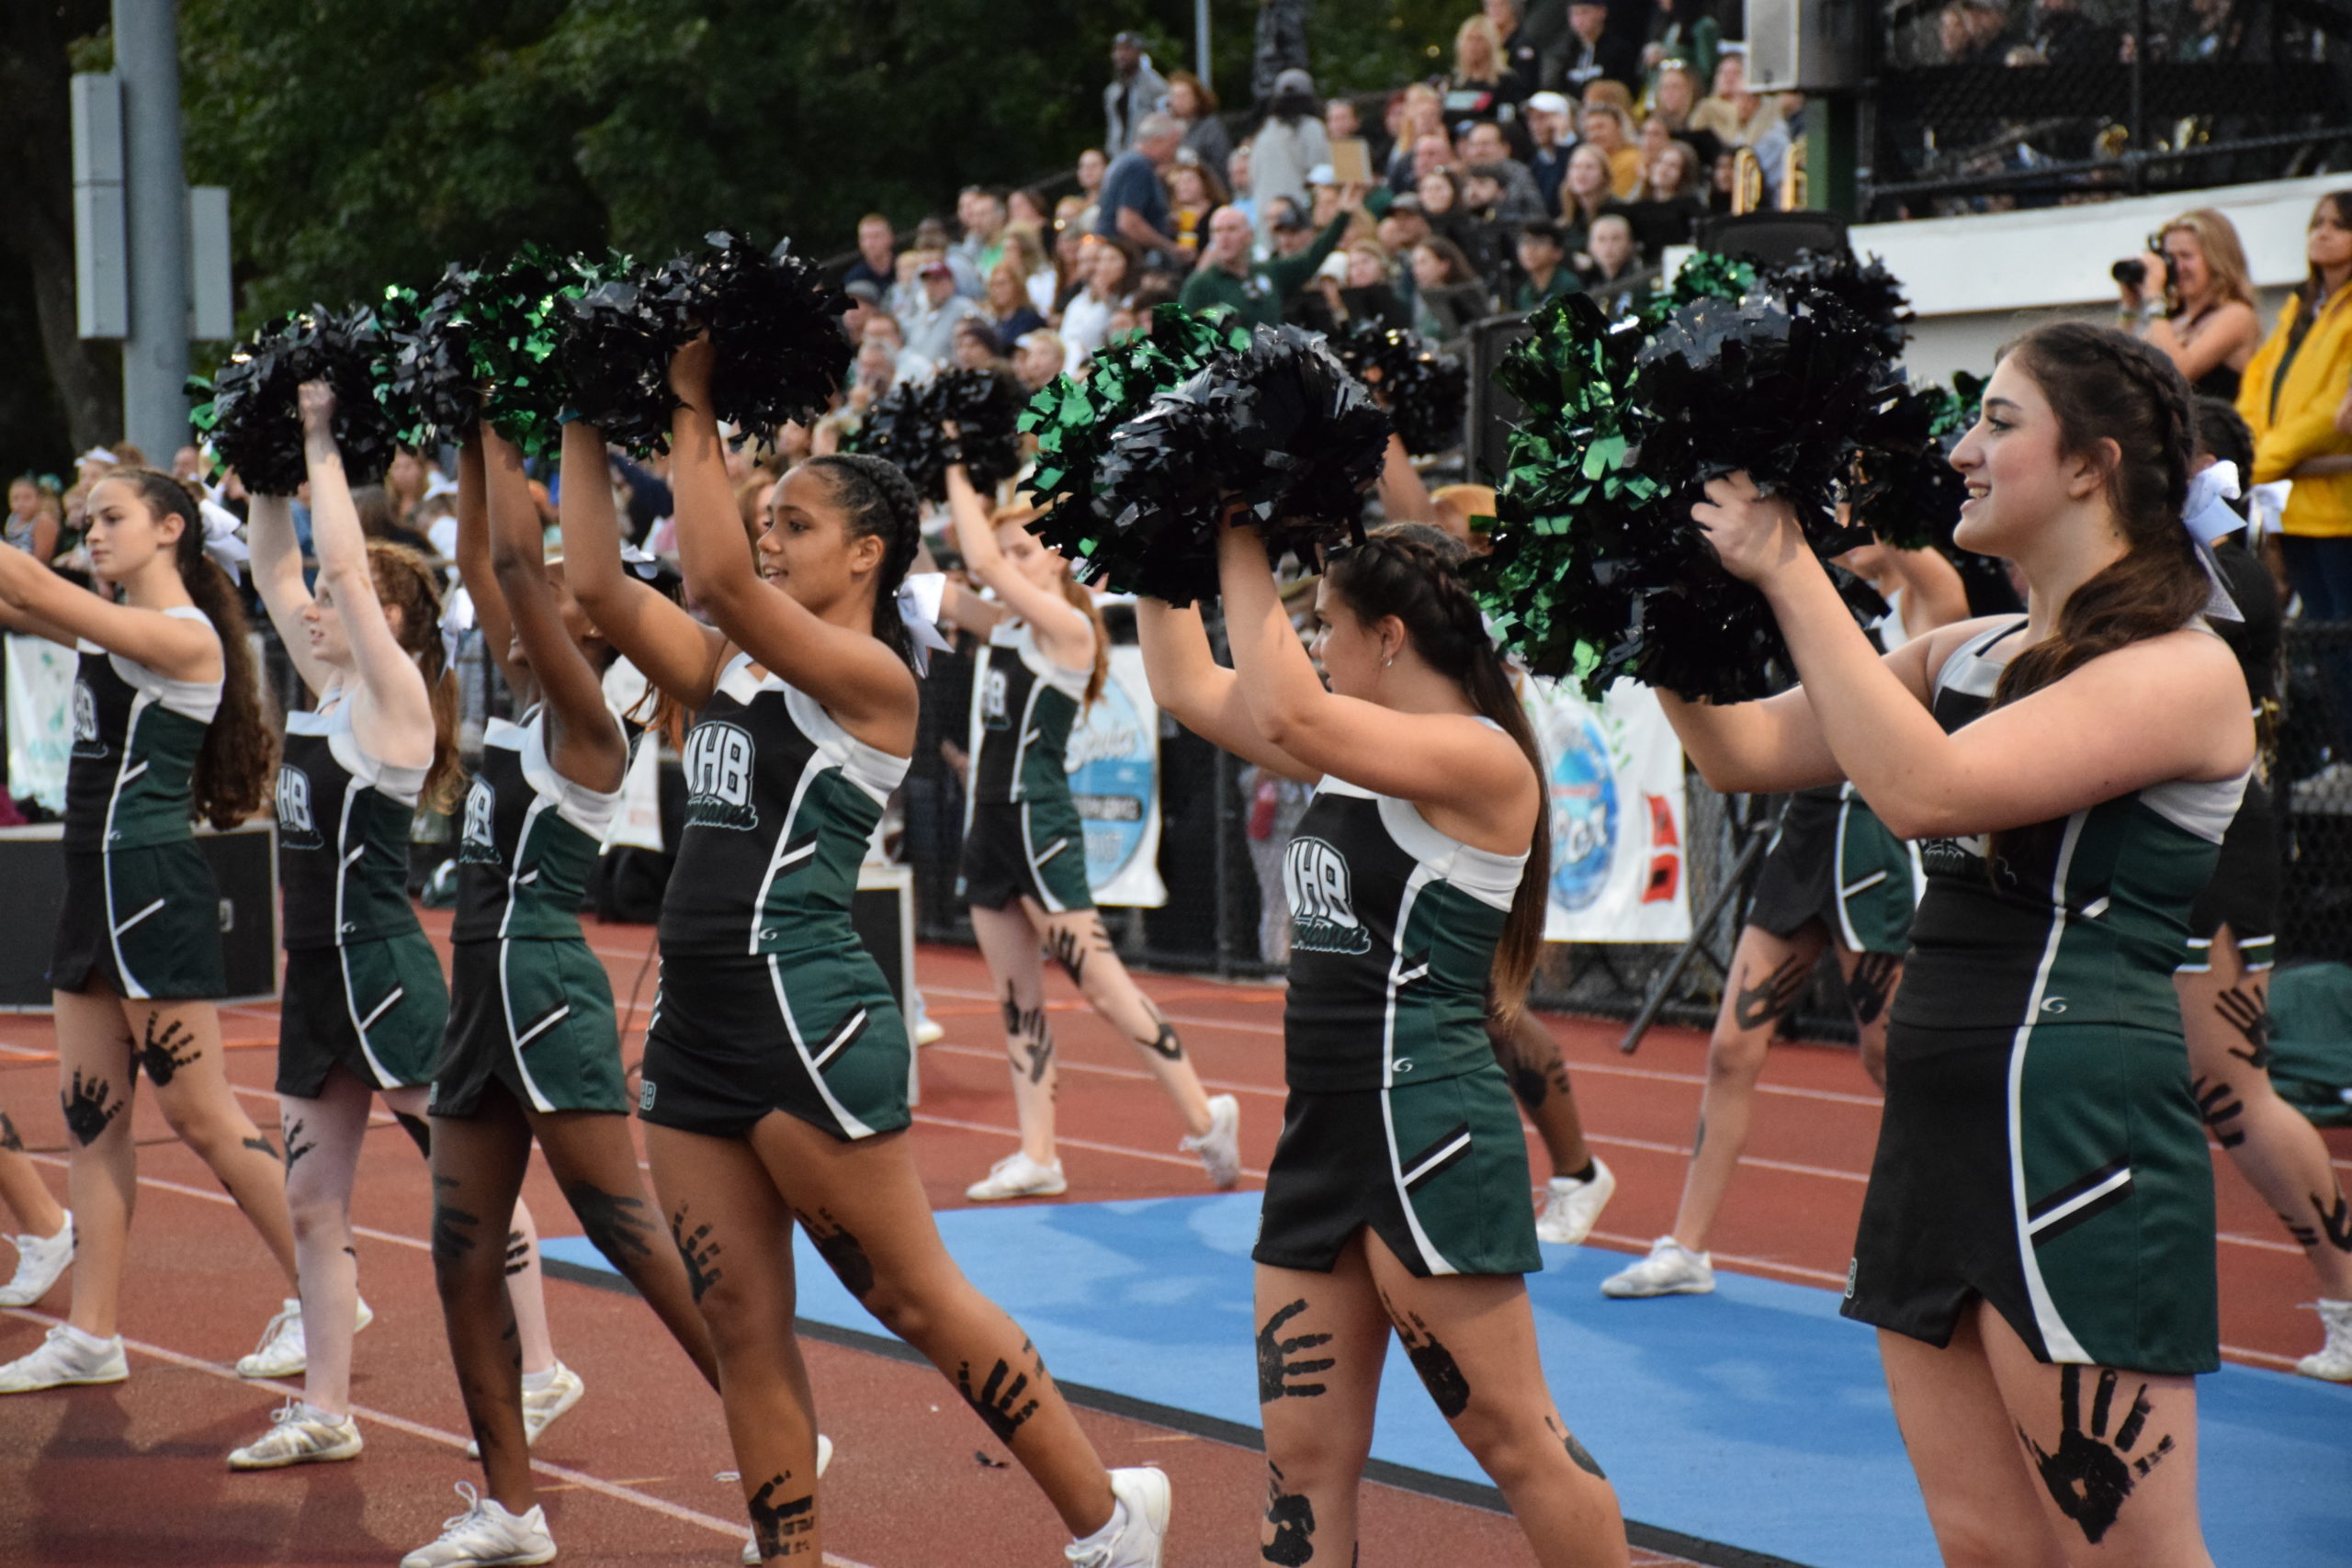 Hurricane pride was abundant as the Westhampton Beach School District celebrated homecoming during the week of October 4.